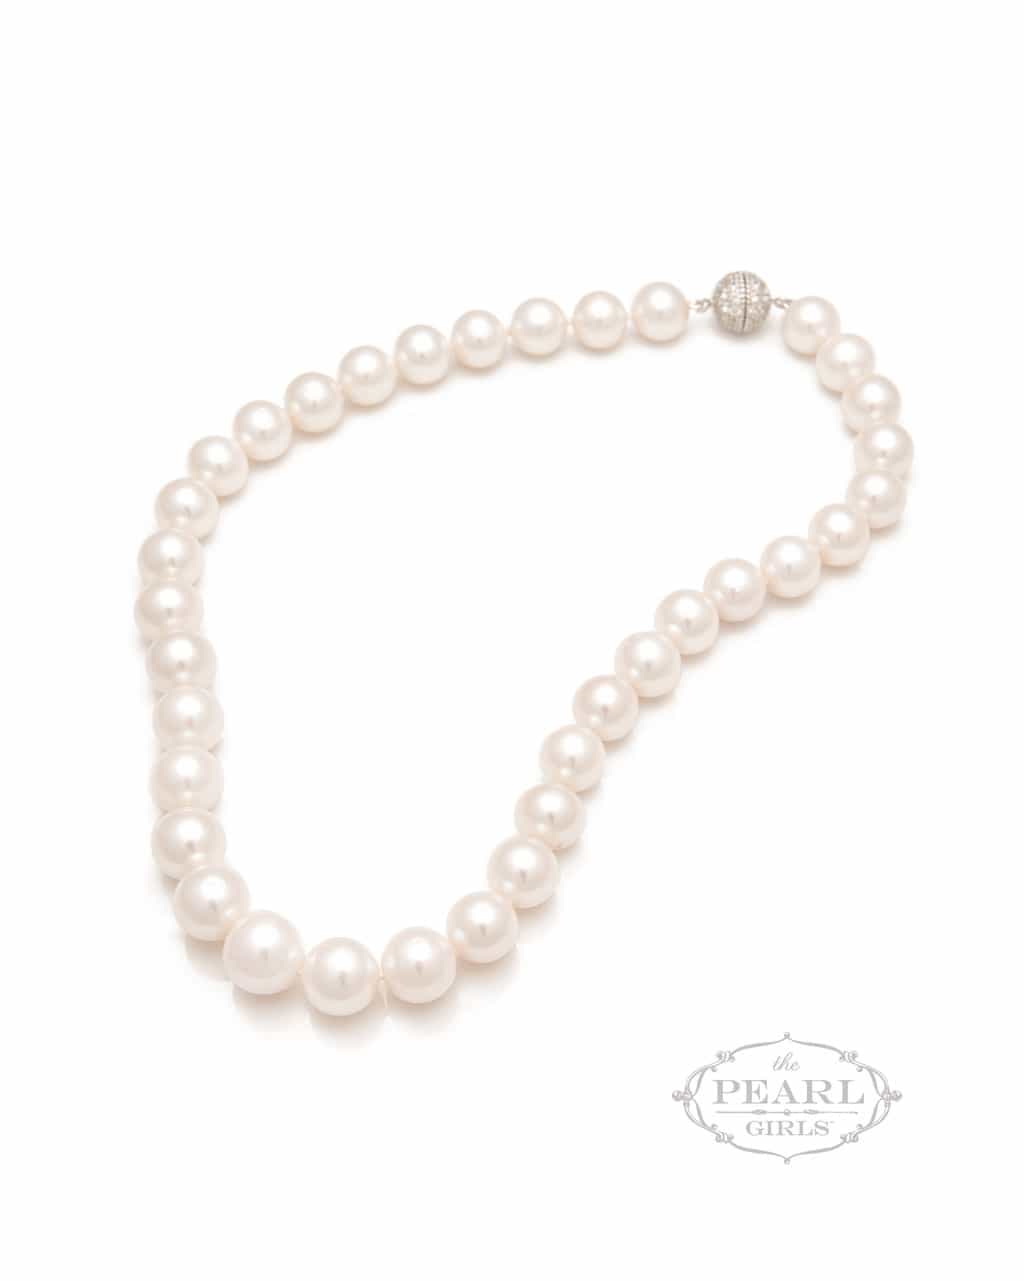 Help Identifying Pearls Please | Pearl Education - Pearl-Guide.com